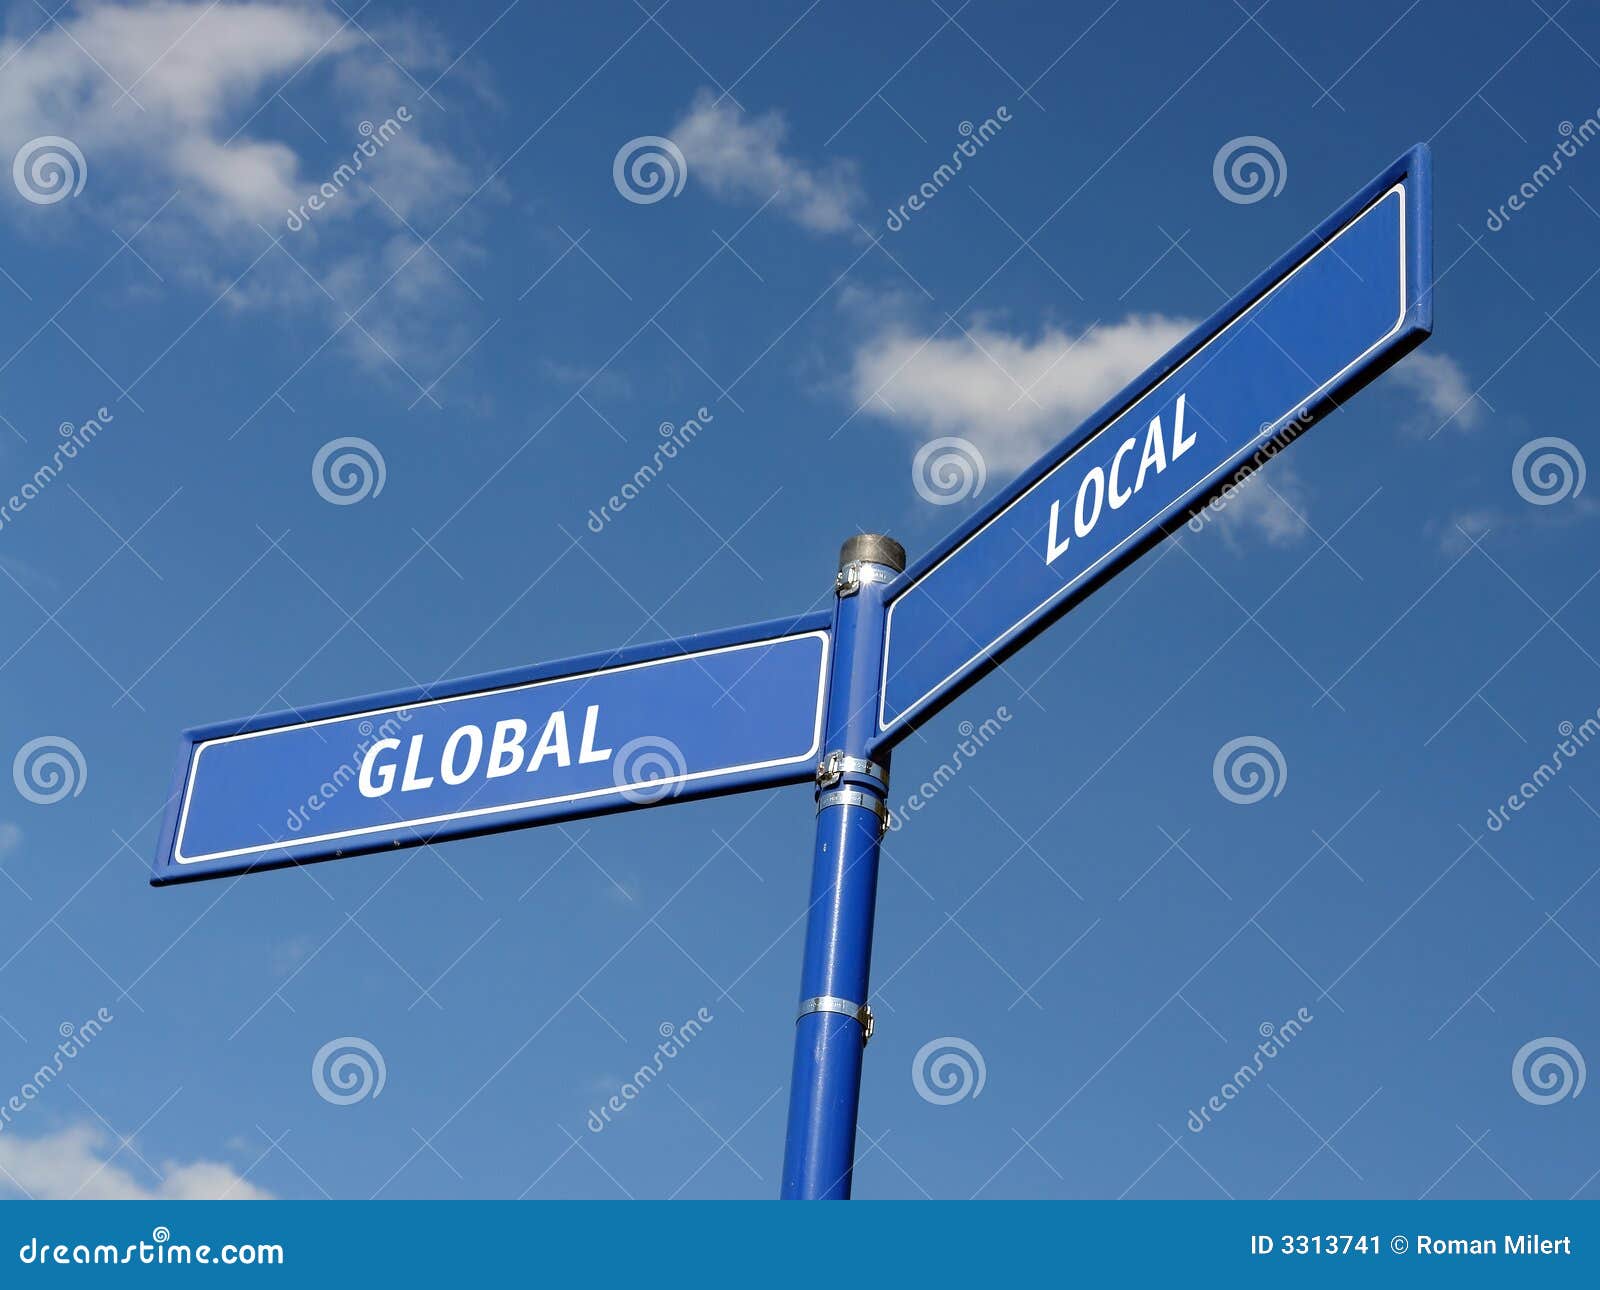 global and local signpost